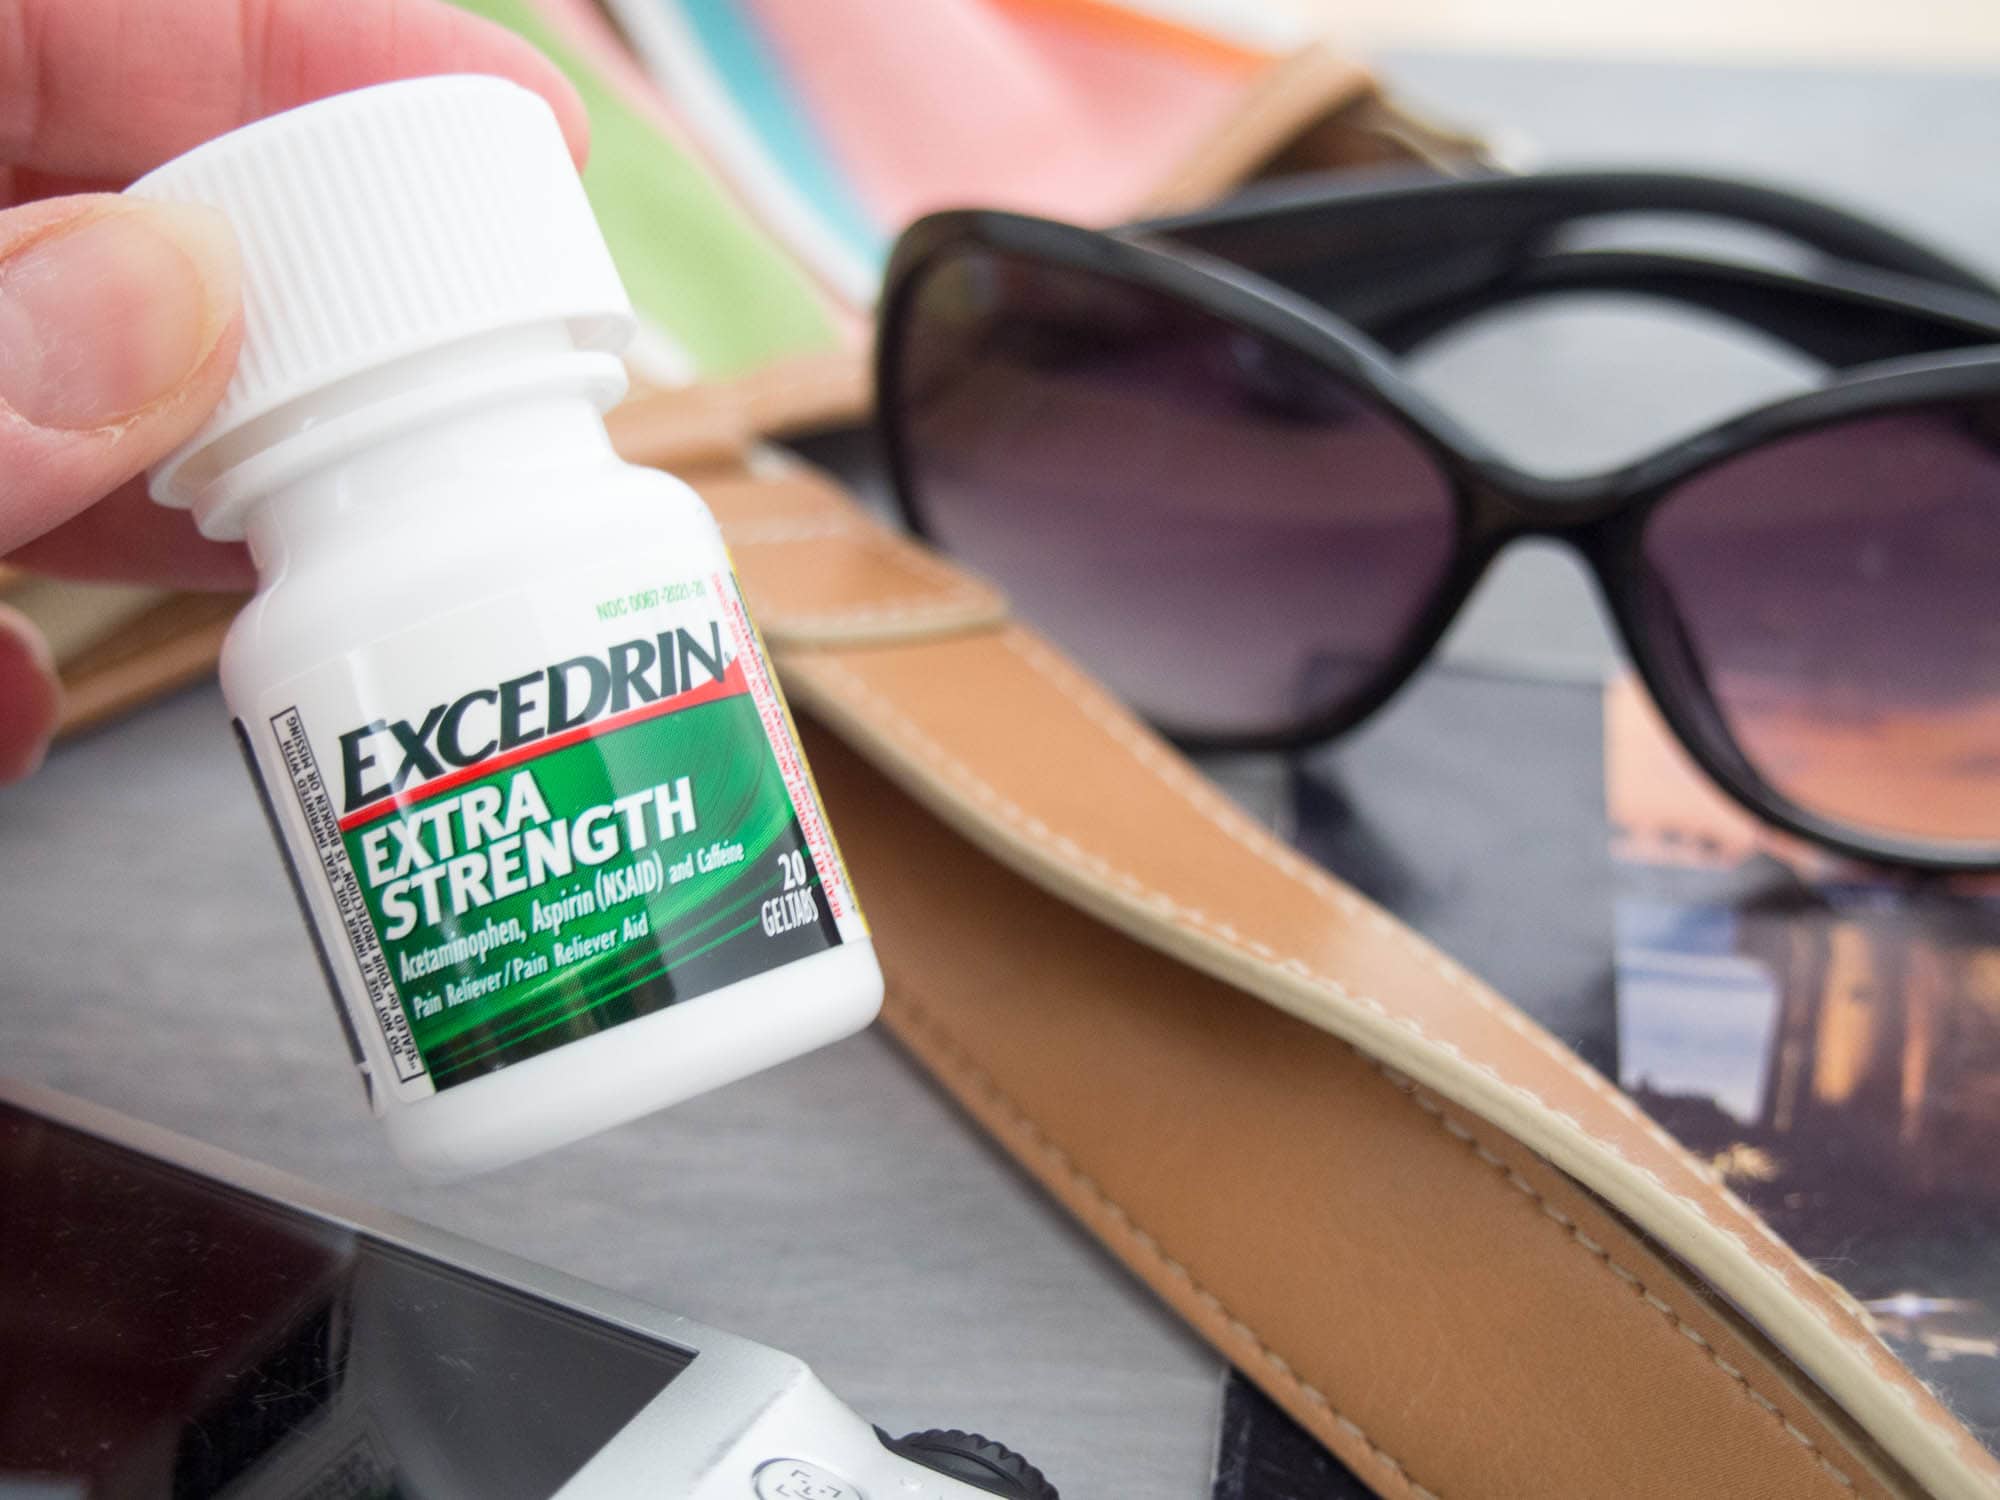 A person holding a bottle of excedrin extra strength.